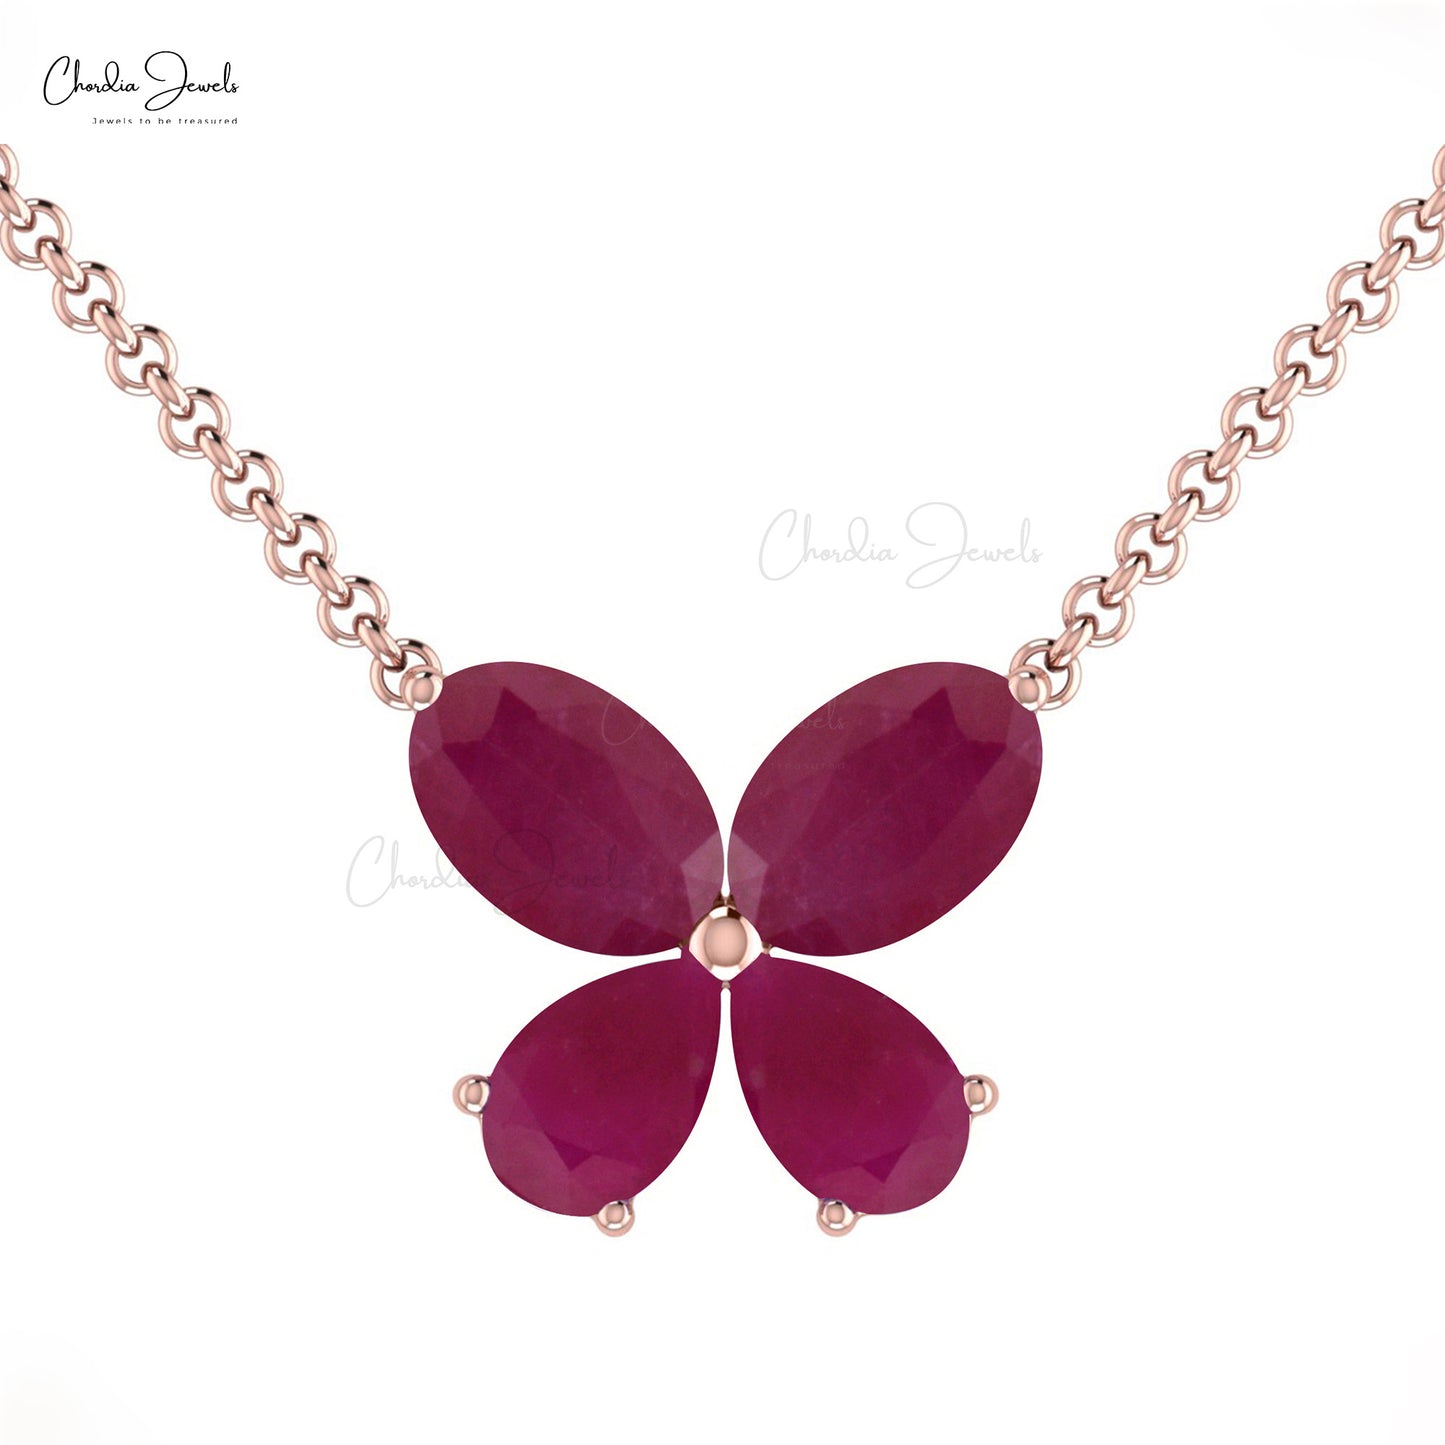 Load image into Gallery viewer, Trend Fashion Jewelry Necklace 14K Pure Gold Butterfly Necklace Pendant Vintage Personalized Genuine Red Ruby Gemstone Charm Necklace Engagement Gift For Her
